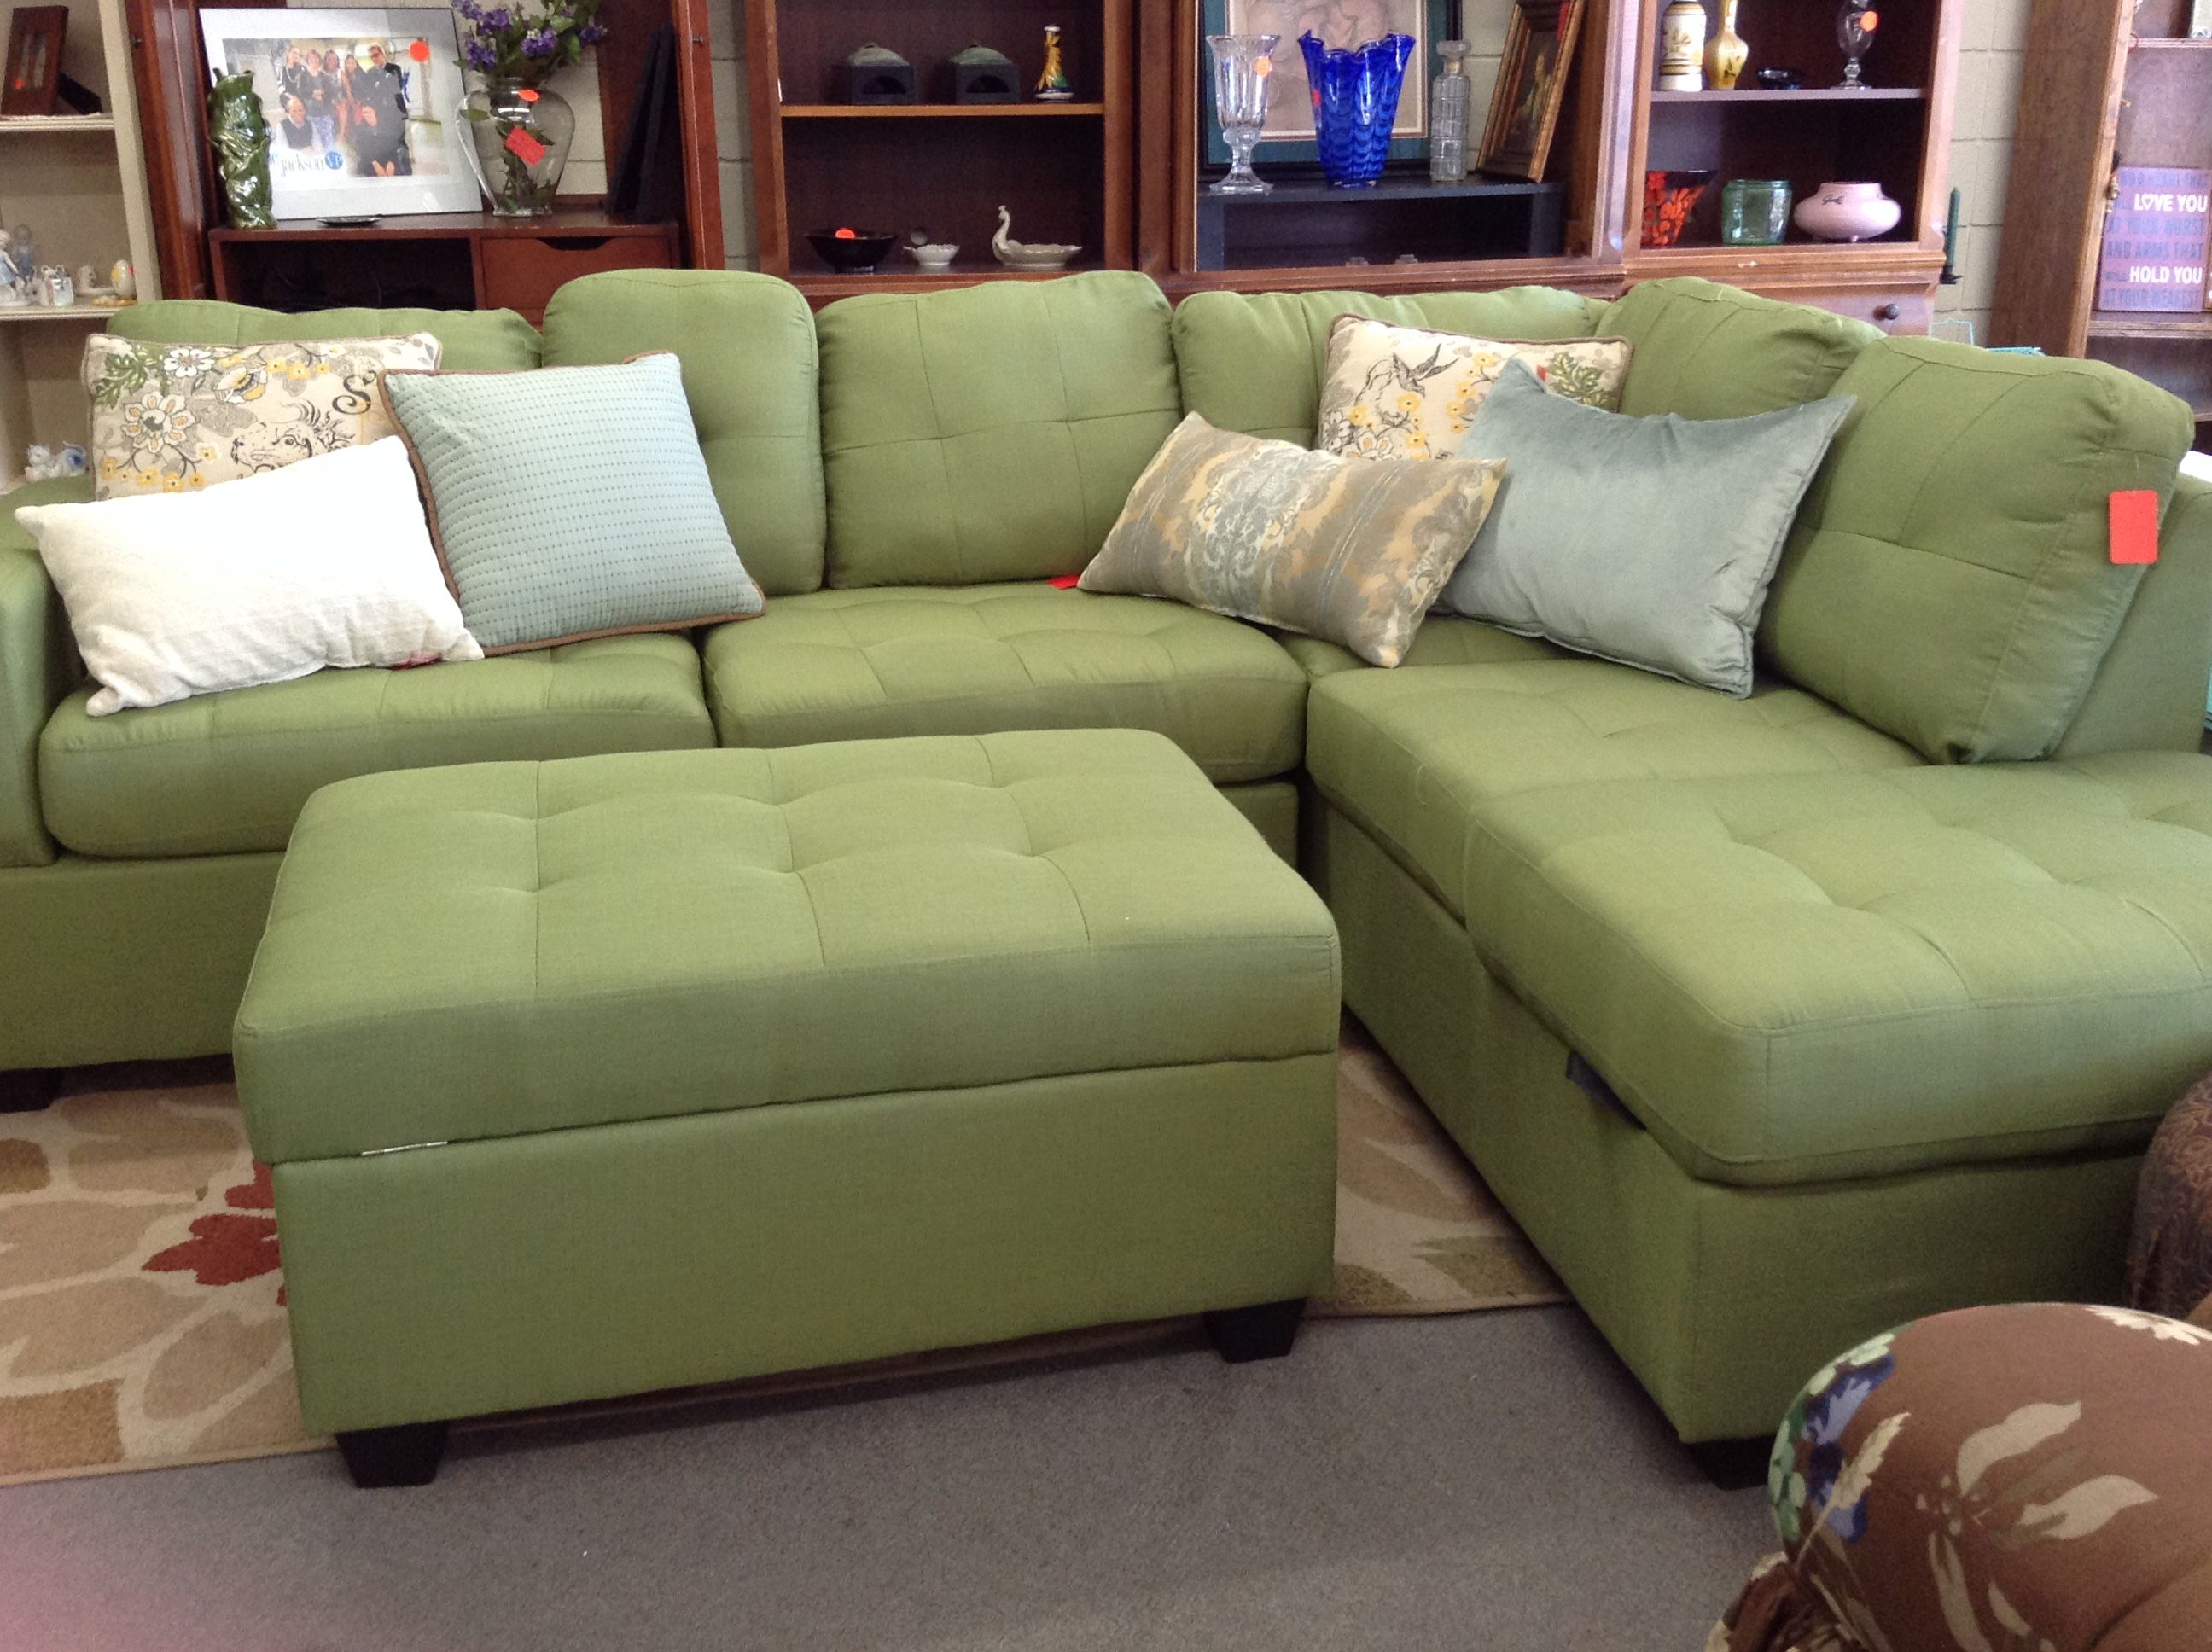 Gallery | Escondido, Ca Intended For Escondido Sofa Chairs (View 21 of 25)